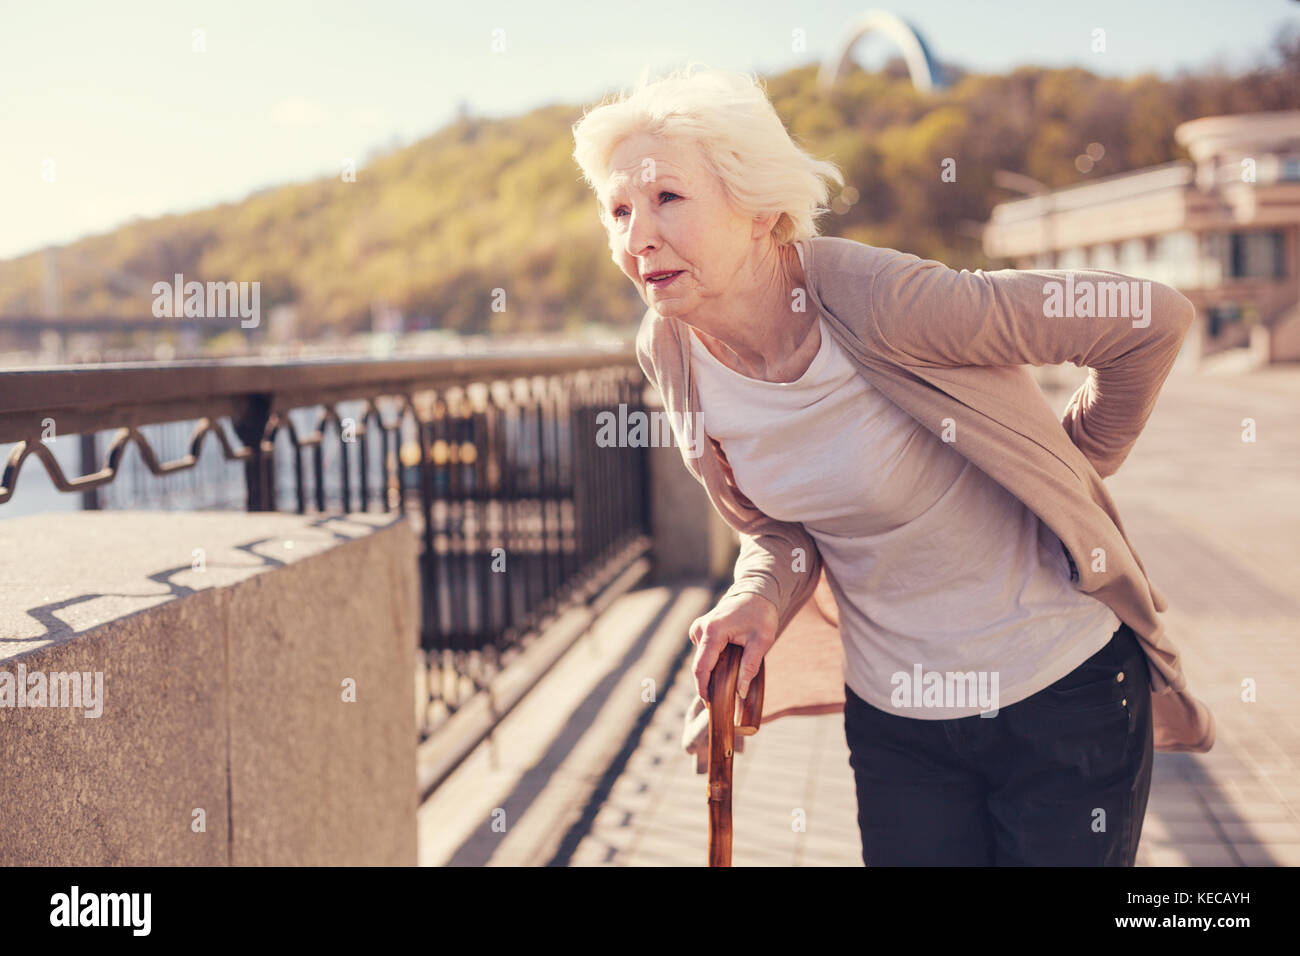 Pleasant senior woman suffering from lower back pain Stock Photo